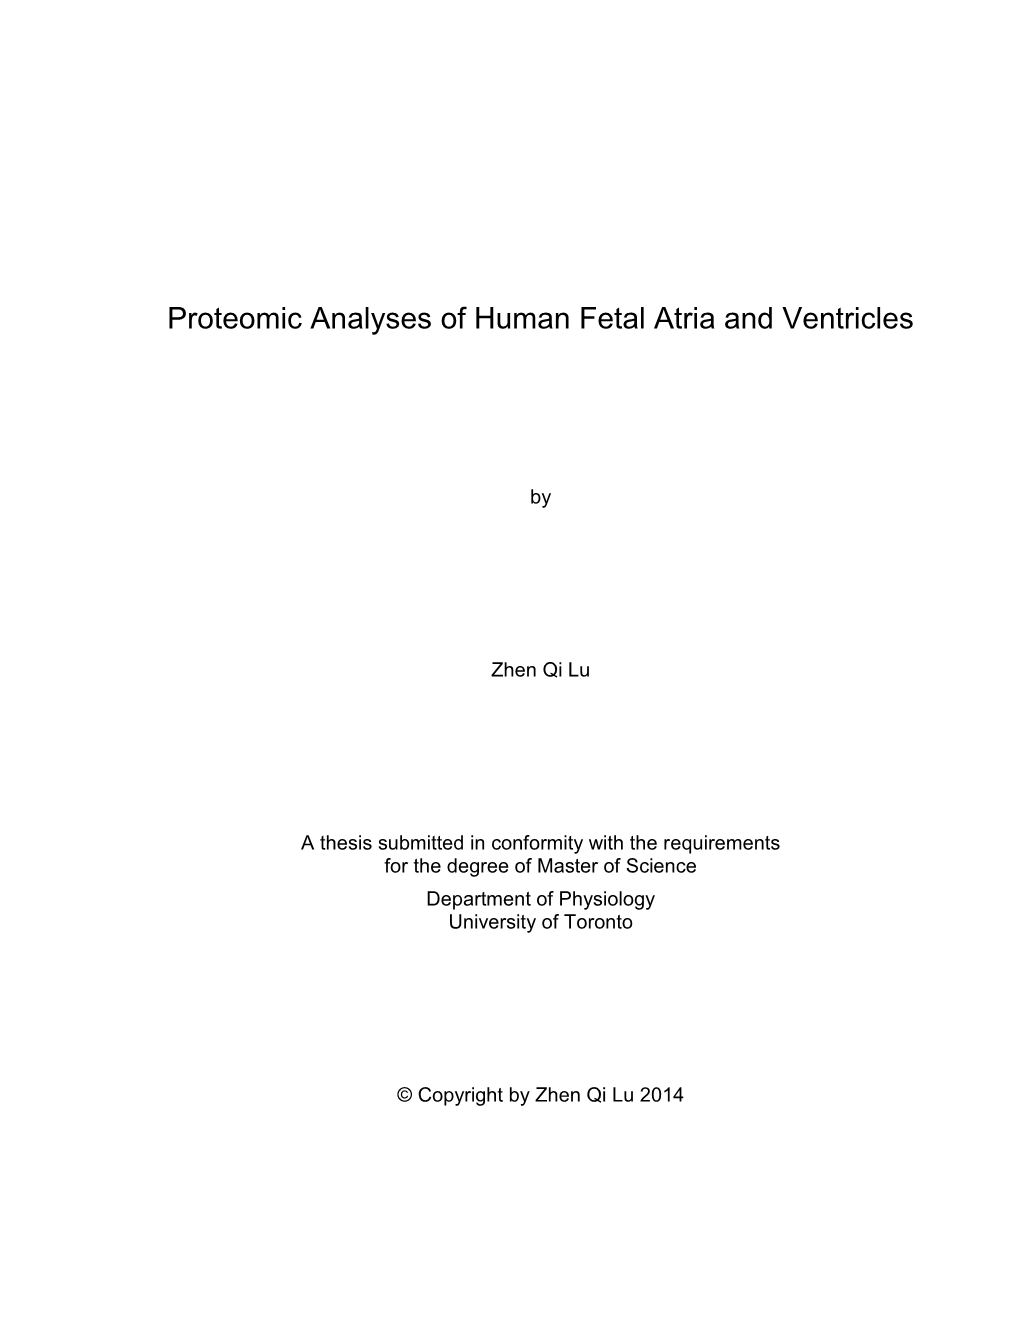 Proteomic Analyses of Human Fetal Atria and Ventricles